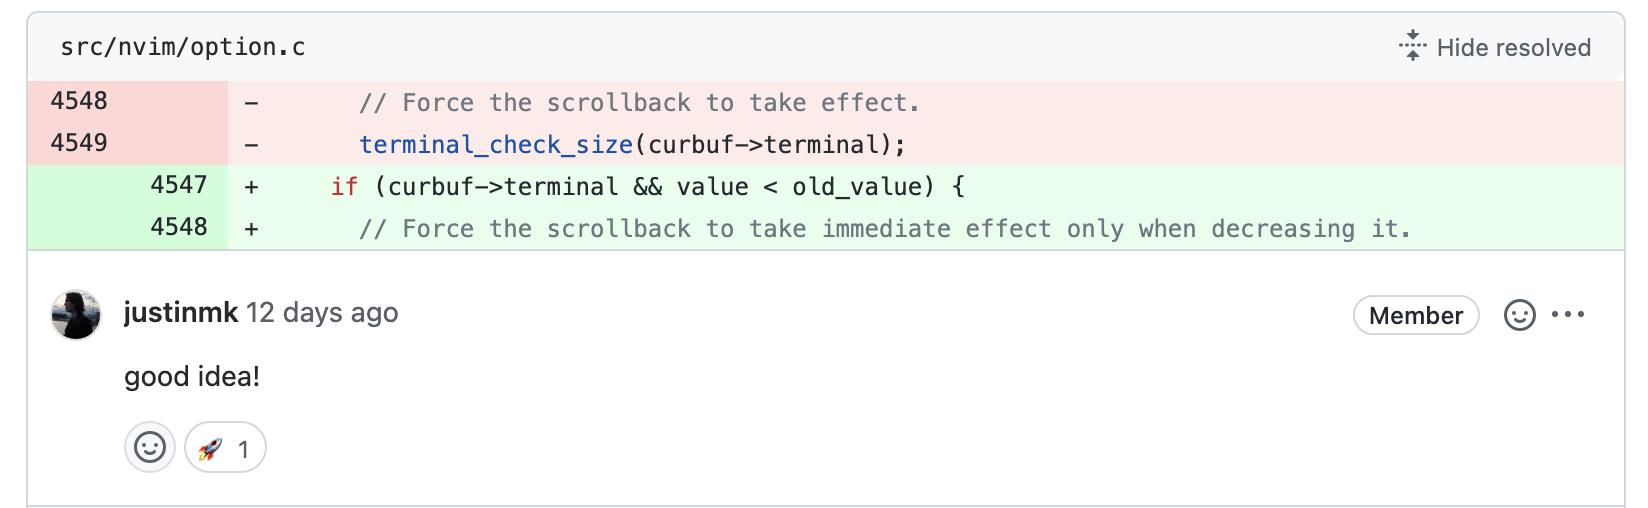 GitHub PR Comment for Code Review, Good Idea